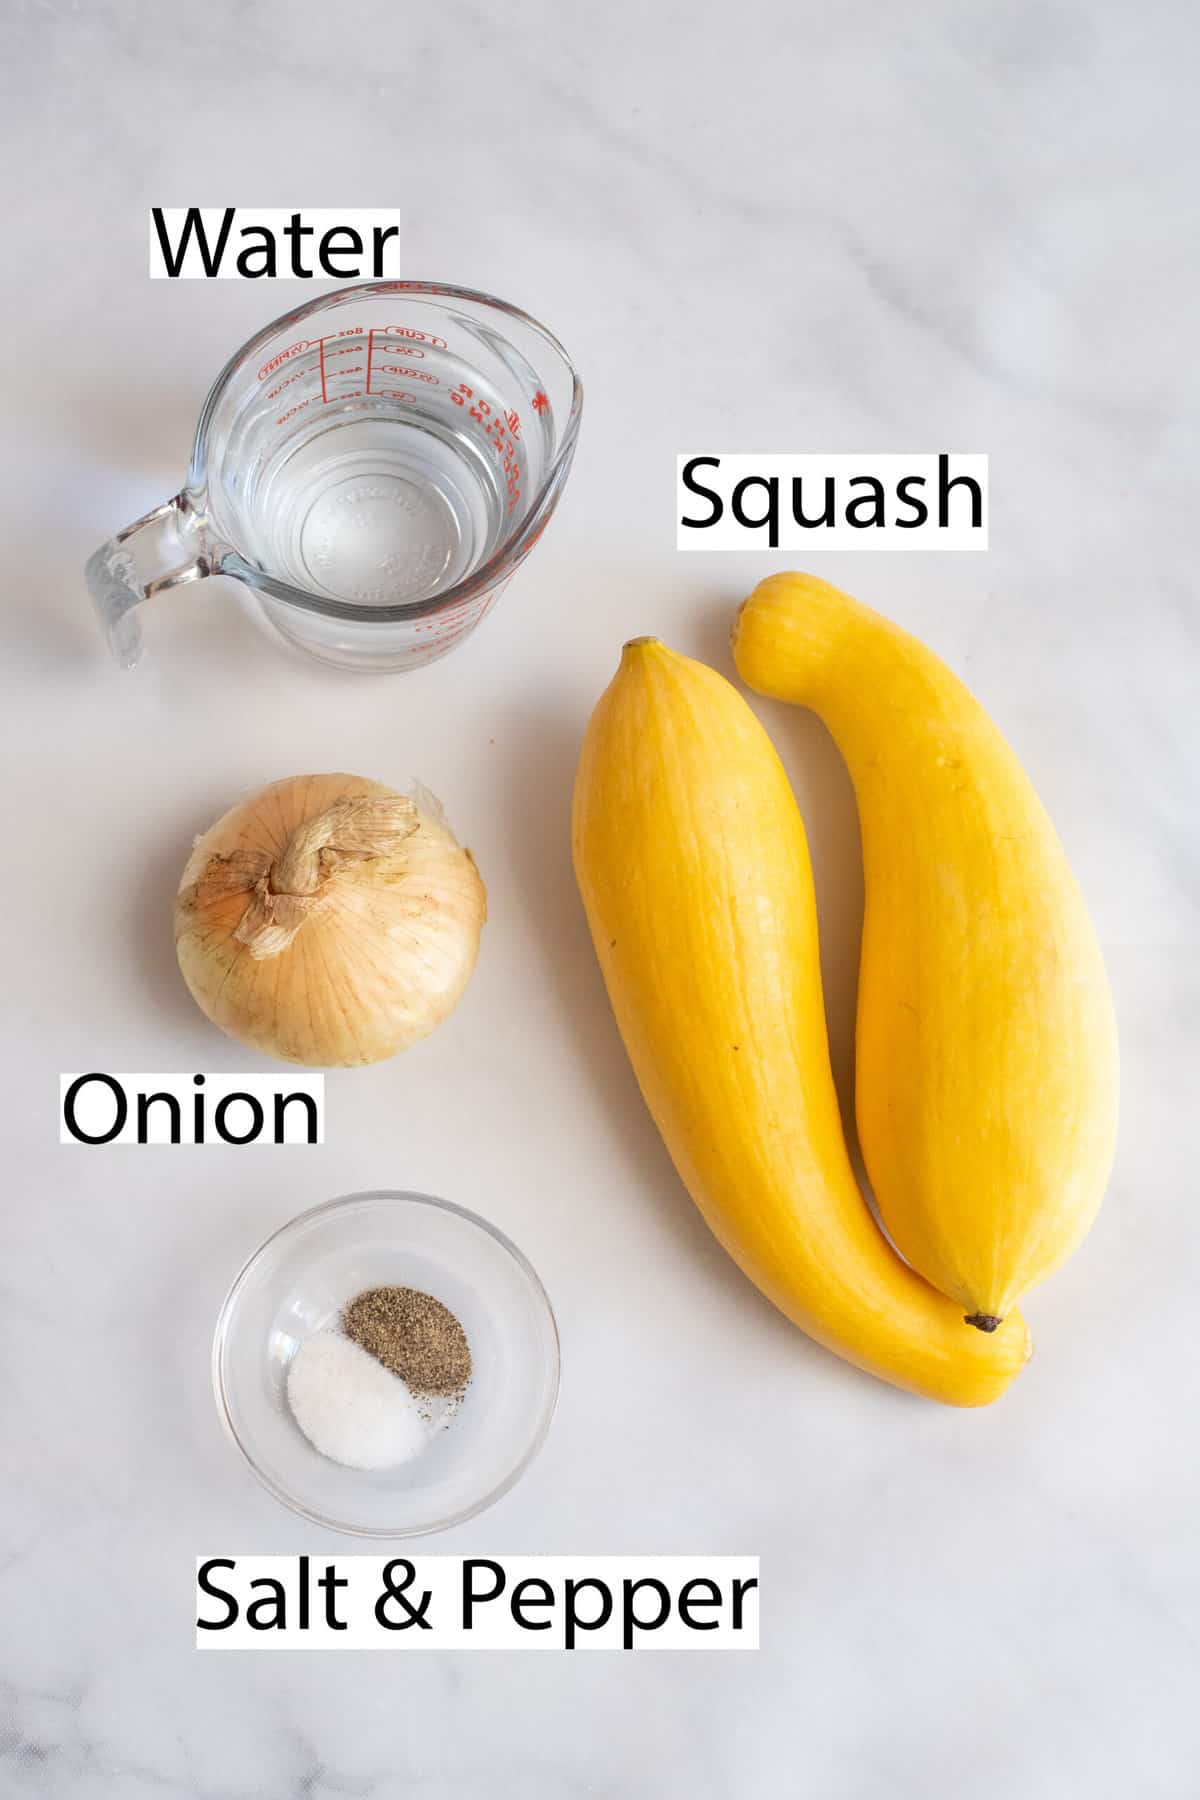 Labeled ingredients for boiled squash and onions.